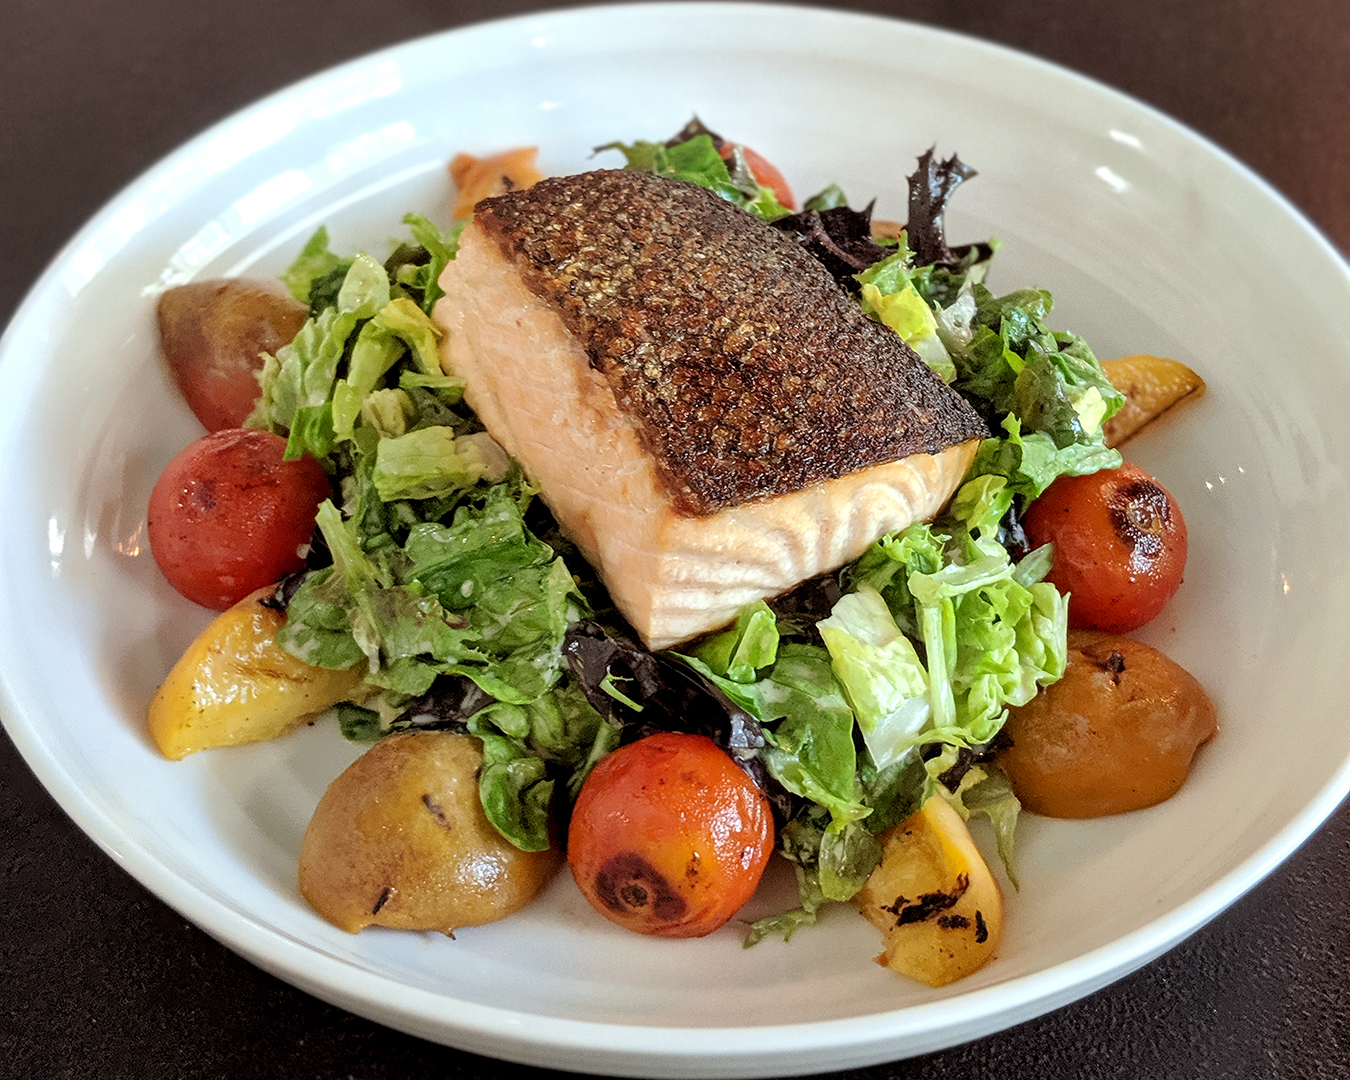 Salmon on a bed of lettuce surrounded by blistered cherry tomatoes and sliced grilled peaches